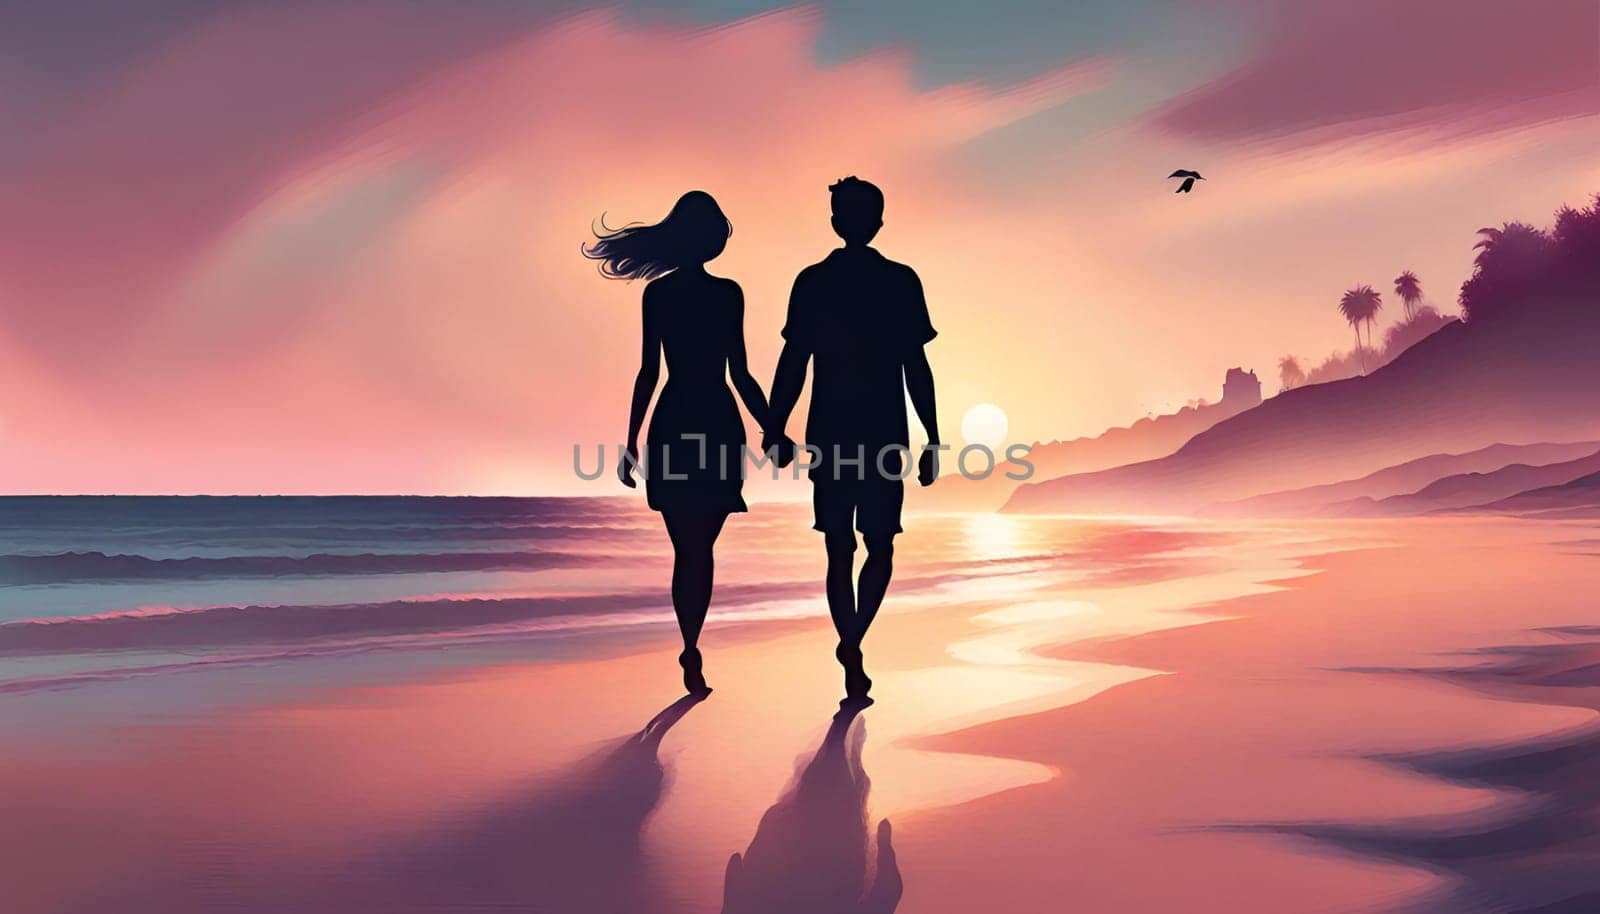 A couple on a beach at sunset. Happy Valentine's Day by Designlab